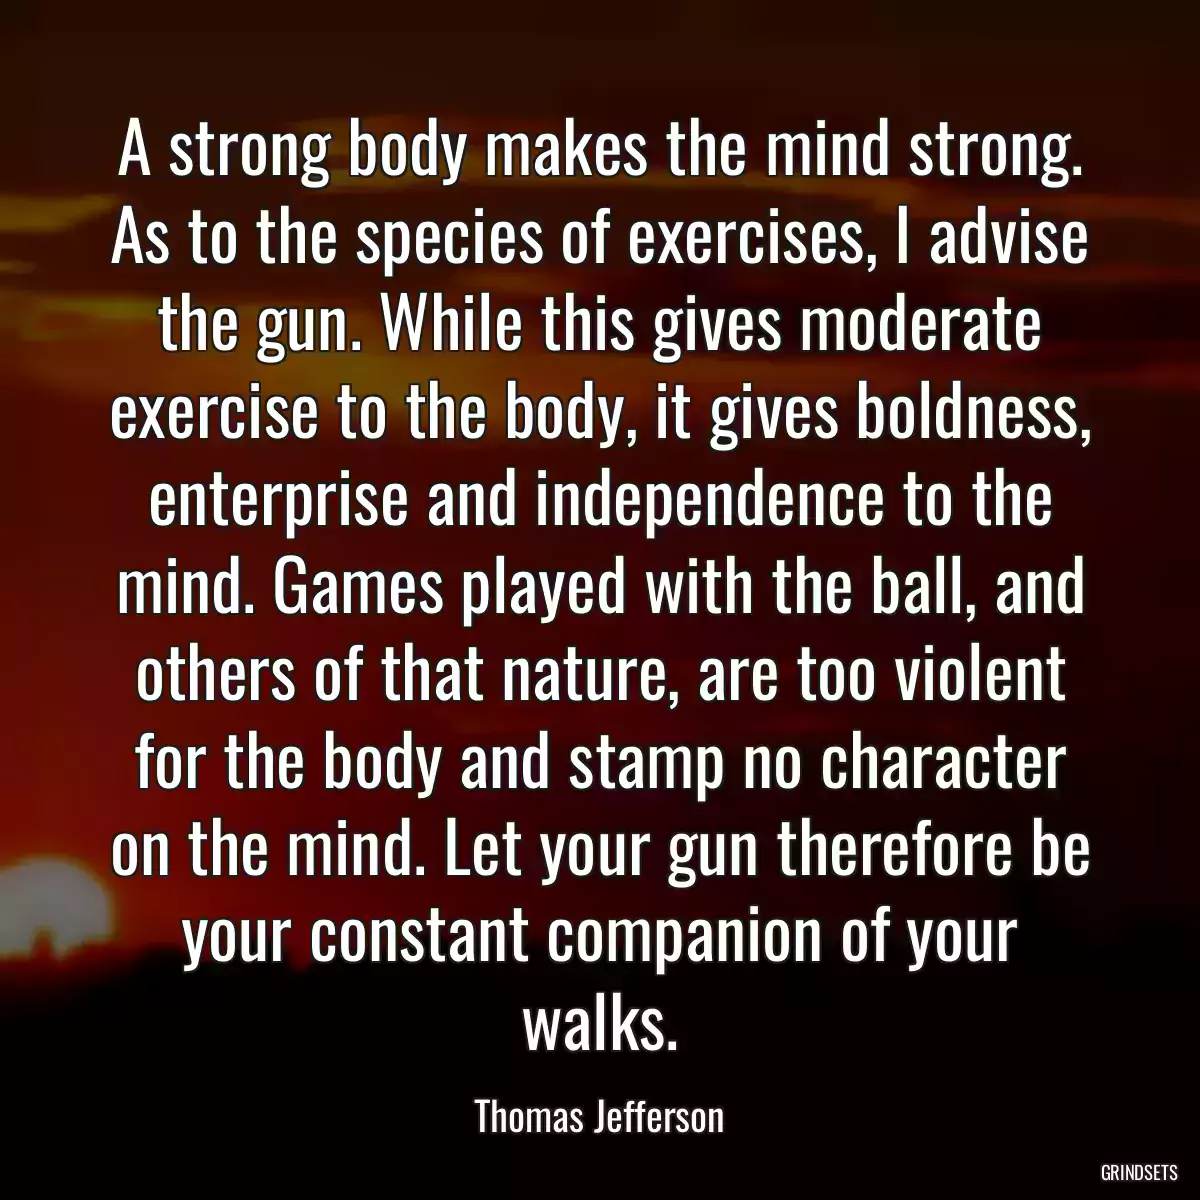 A strong body makes the mind strong. As to the species of exercises, I advise the gun. While this gives moderate exercise to the body, it gives boldness, enterprise and independence to the mind. Games played with the ball, and others of that nature, are too violent for the body and stamp no character on the mind. Let your gun therefore be your constant companion of your walks.